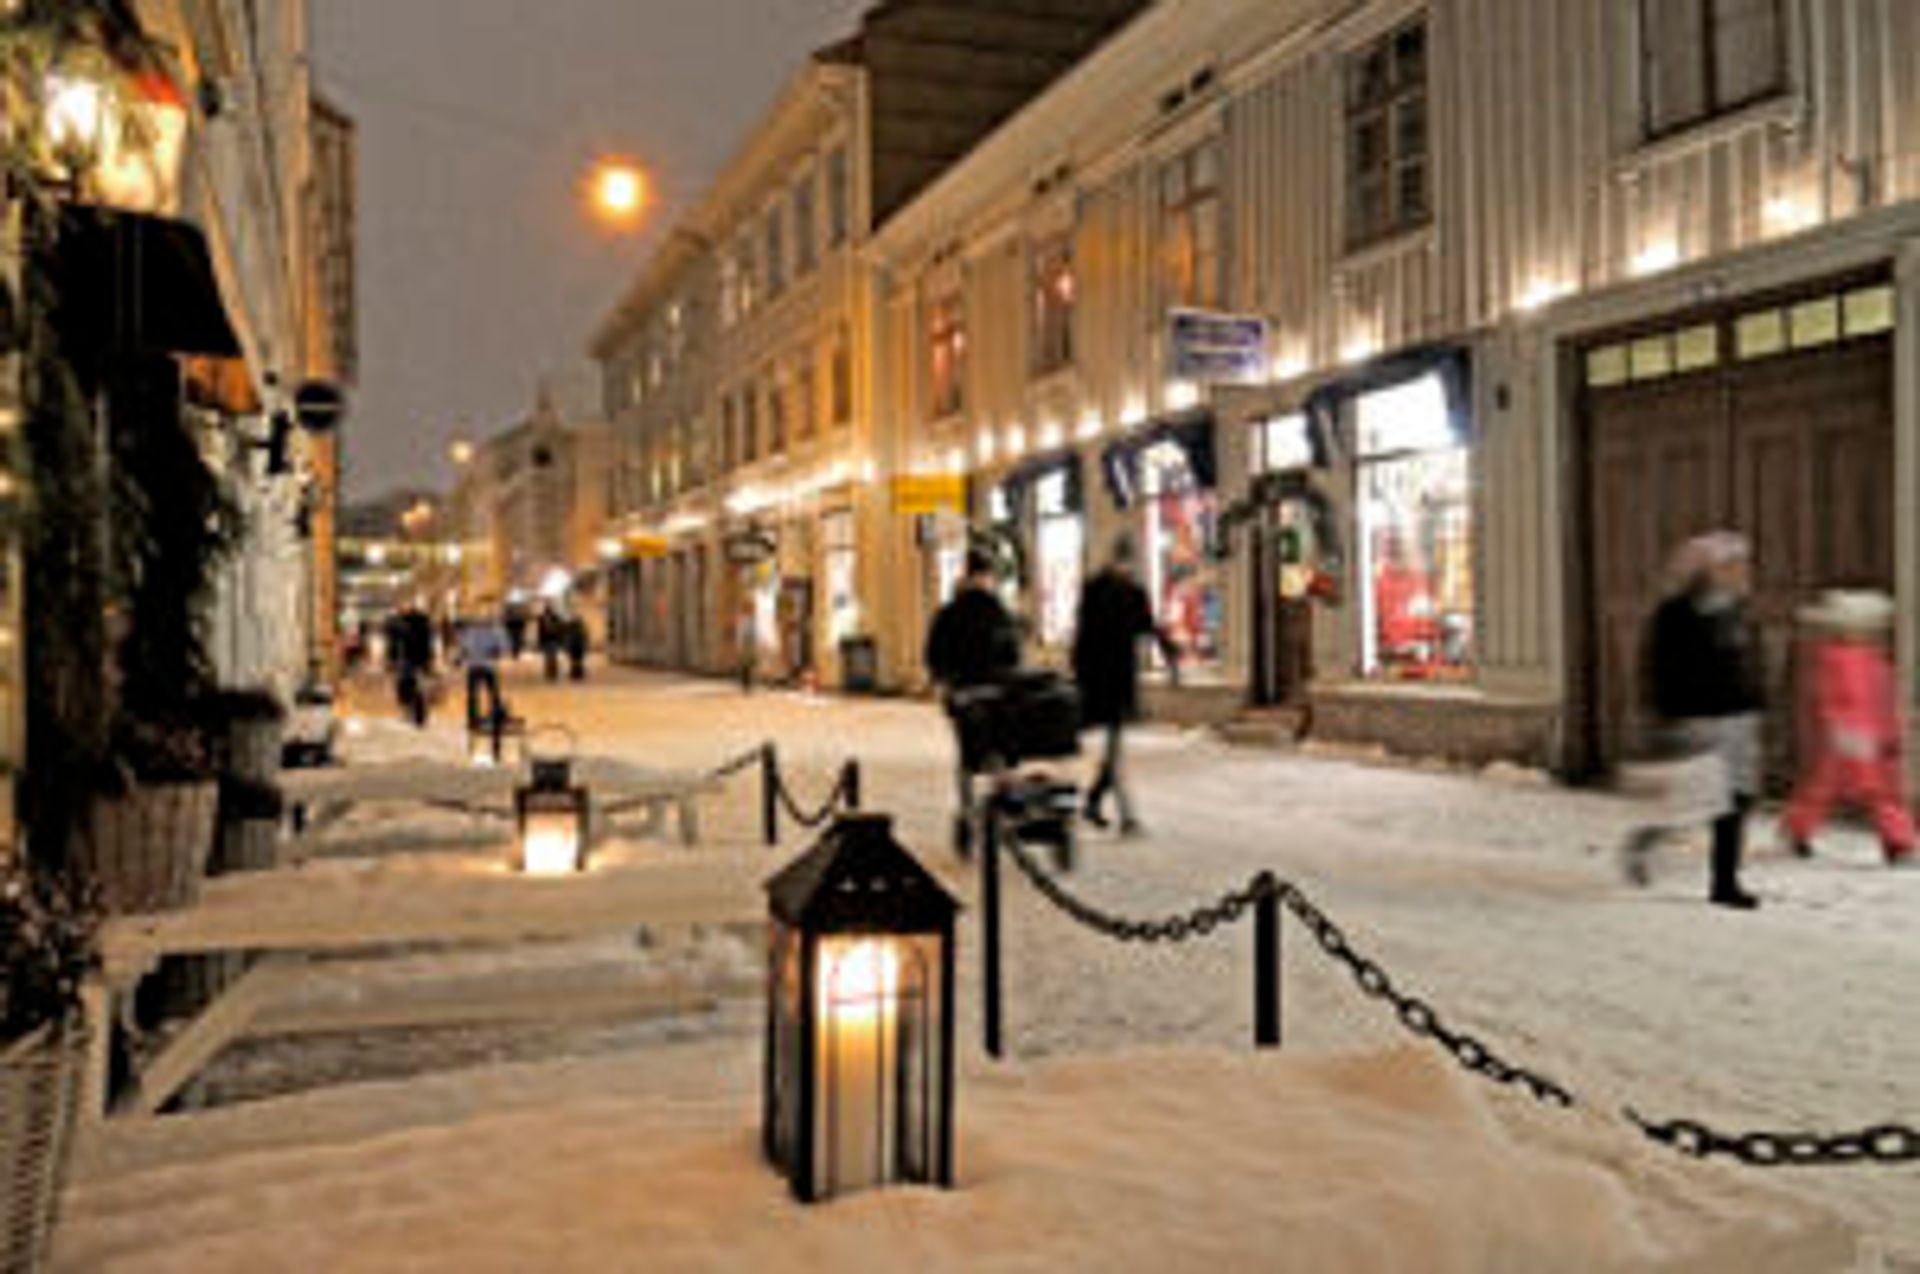 People walking down a snowy street lit up by Christmas lights.